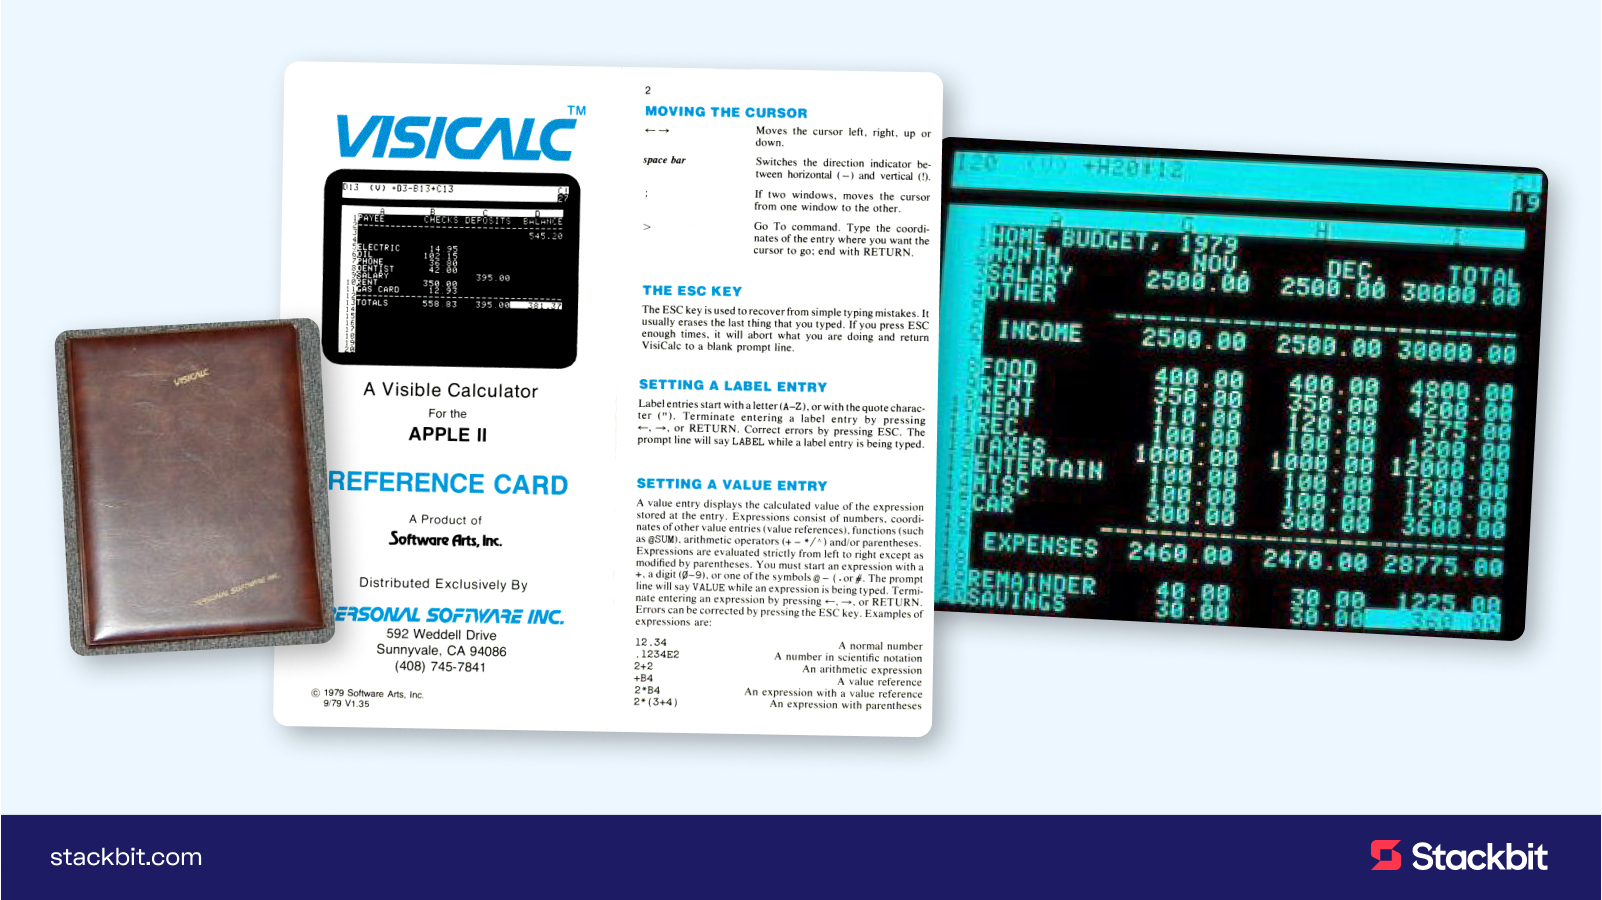 VisiCalc's packaging, reference cards, and ui